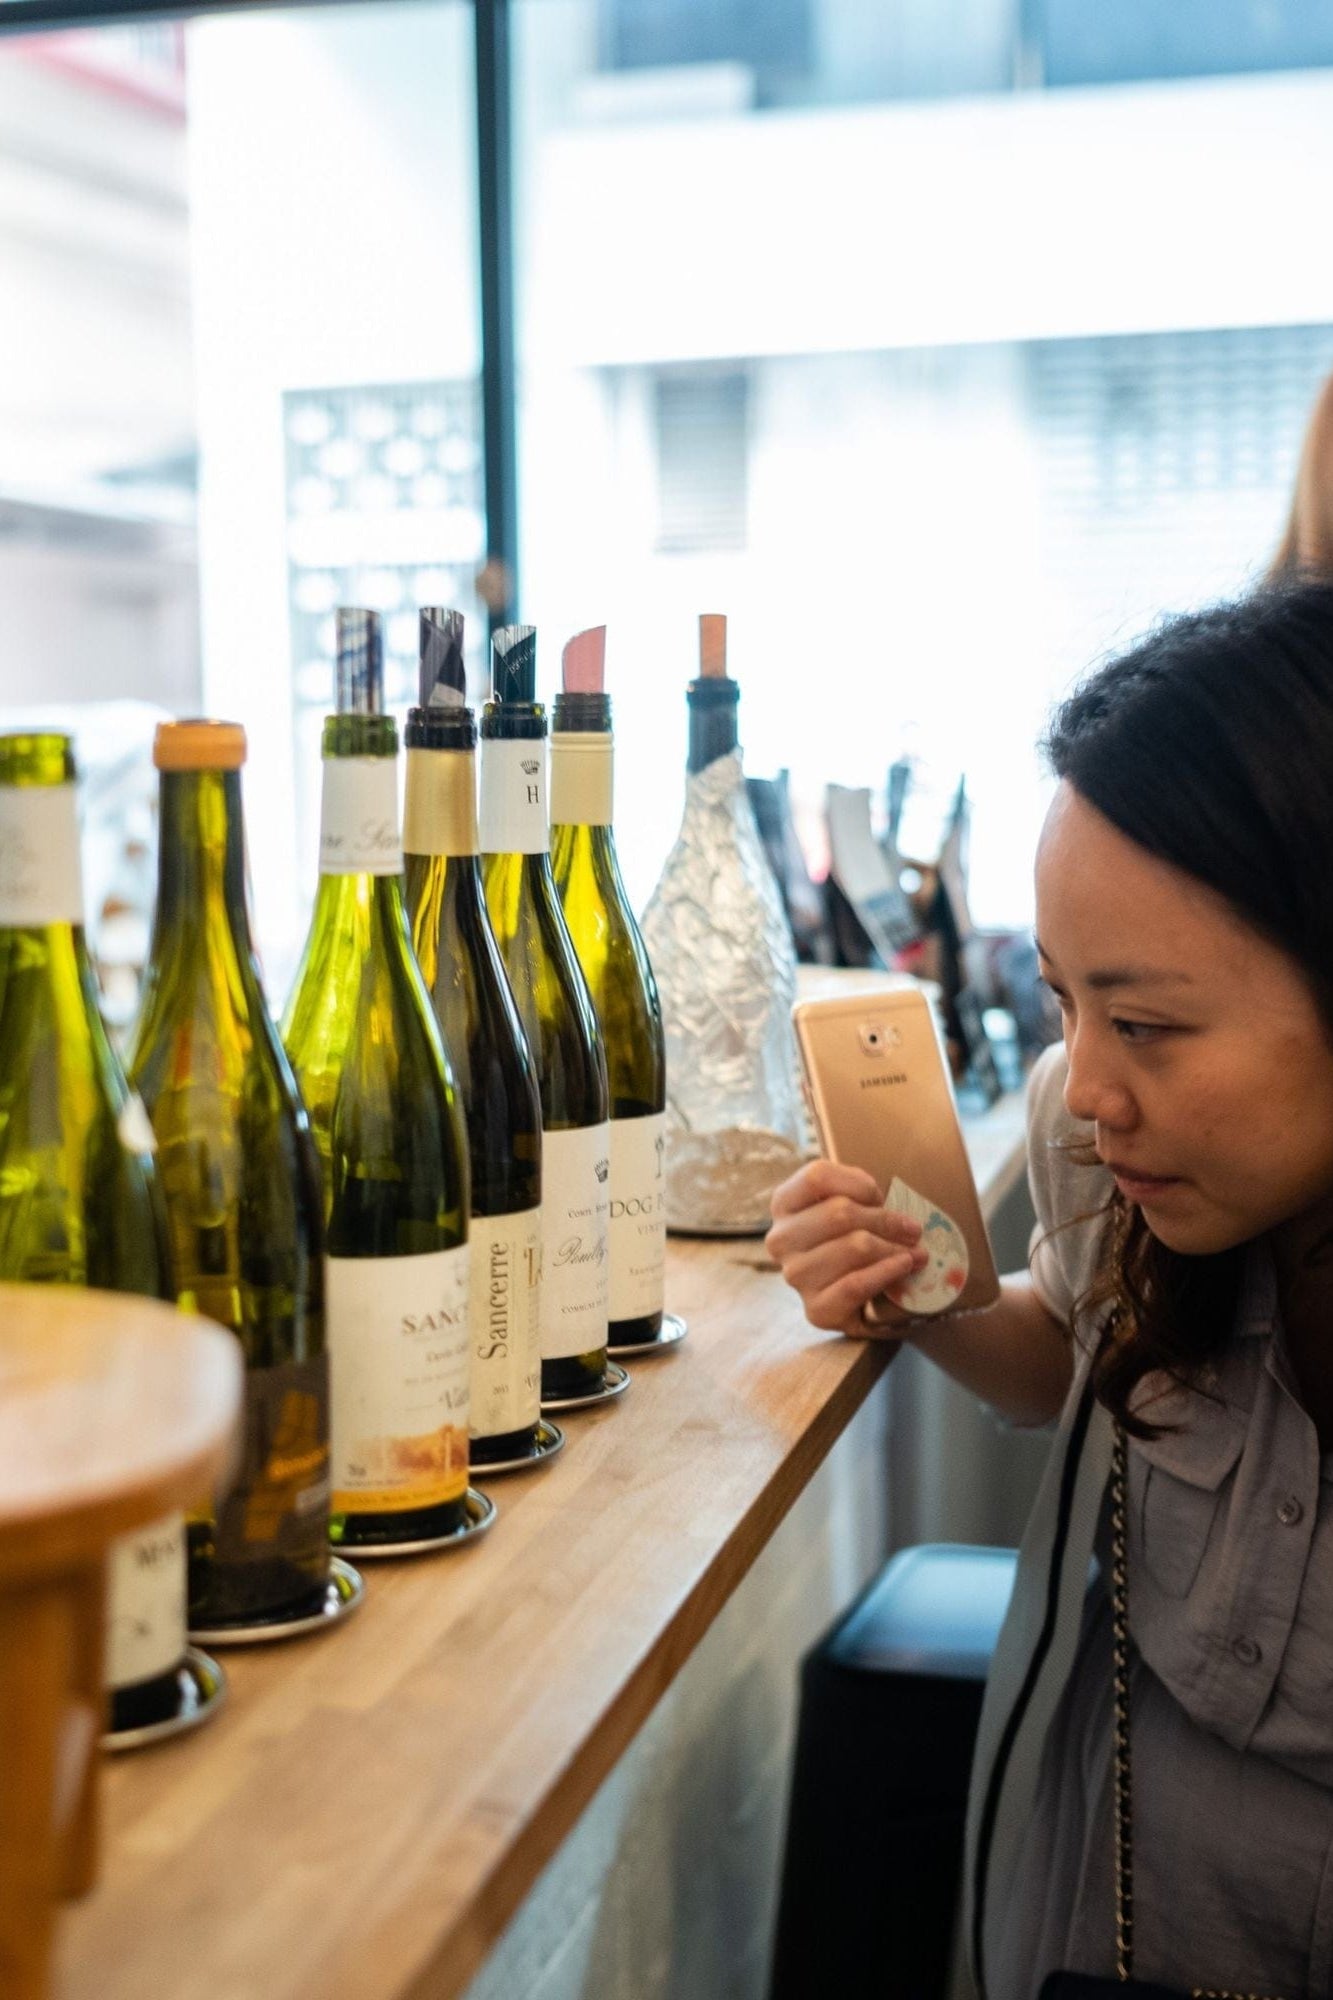 Shop PENTICTON French GourMay Edition Rhone Wine & More Wine Tasting Workshop【尋味法國】法國五月美食薈品酒工作坊 online at PENTICTON artisanal French wine store in Hong Kong. Discover other French wines, promotions, workshops and featured offers at pentictonpacific.com 